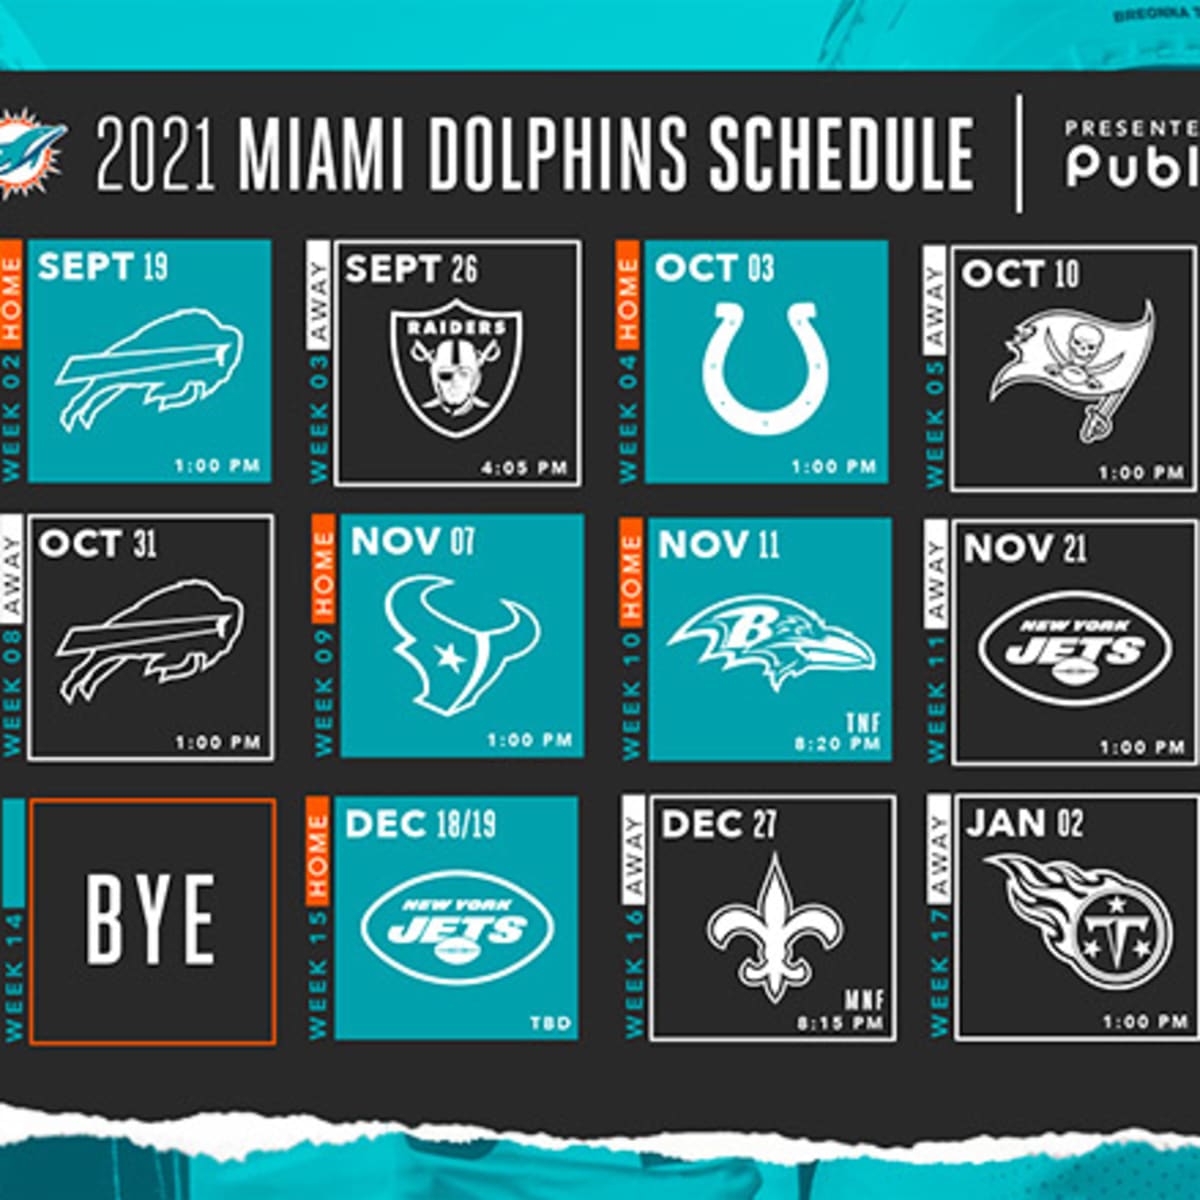 Miami Dolphins 2022 Schedule Dates Miami Dolphins Schedule 2021 - Athlonsports.com | Expert Predictions,  Picks, And Previews